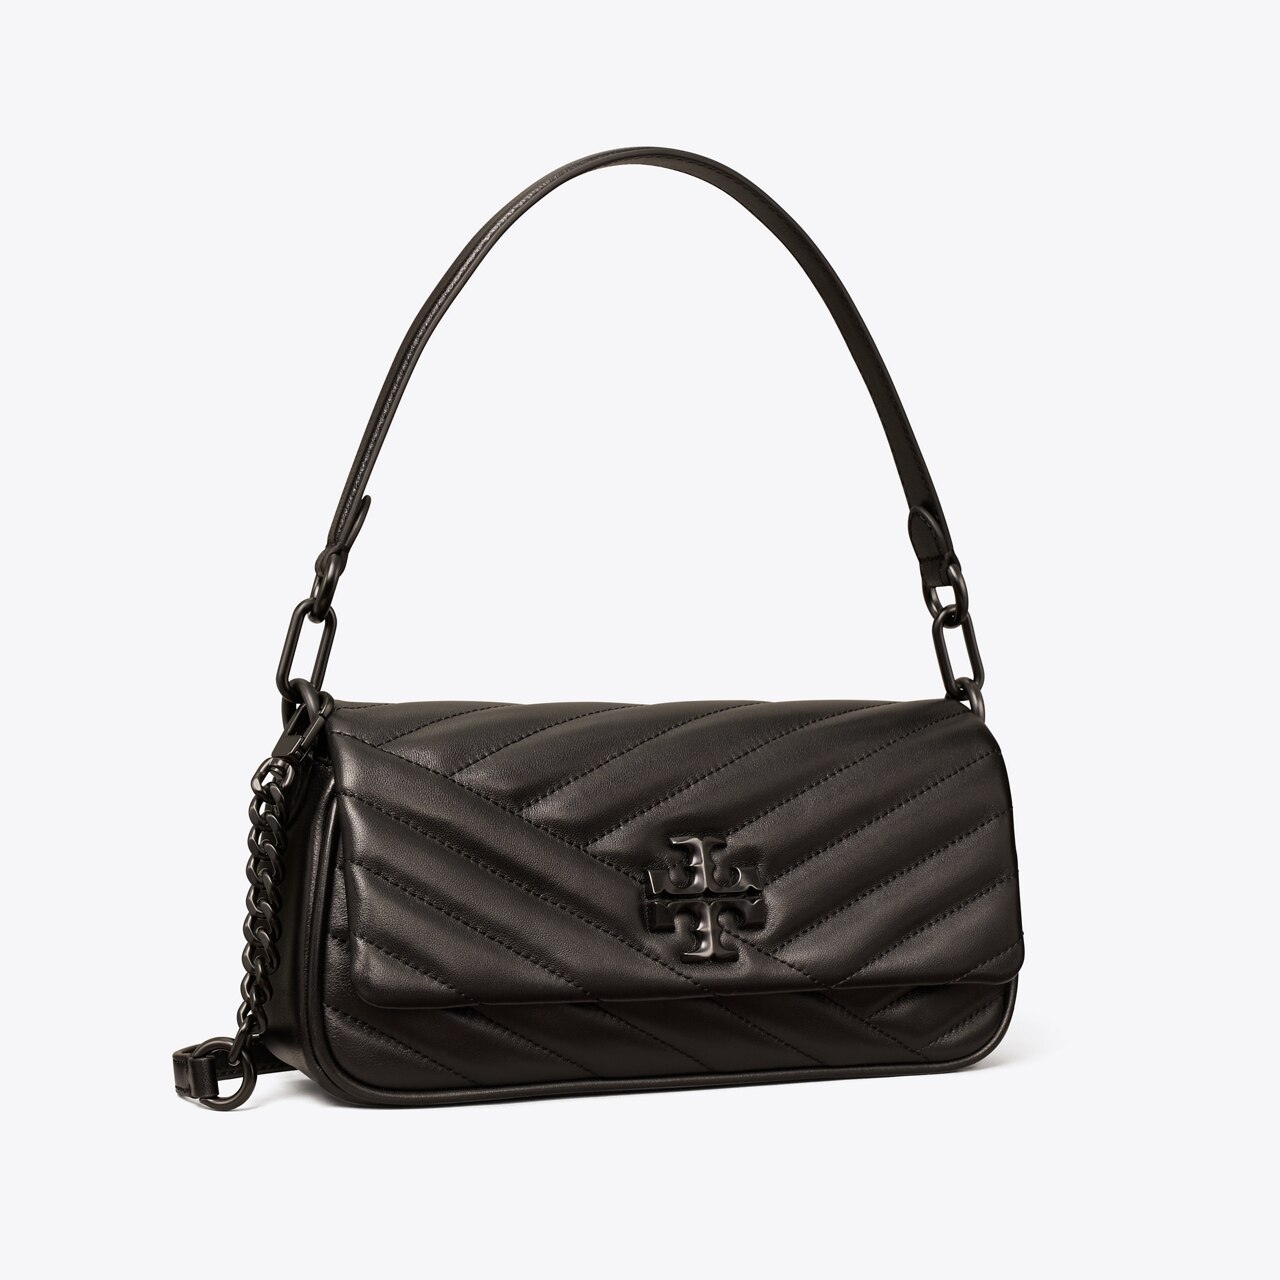 Shop till' Drop - Tory burch Kira Chevron Flap Shoulder Bag 🔥 Price : IDR  3,650.000 Details : •Fix all phone sizes up to an iPhone XS and Samsung  Galaxy S9+ Leather